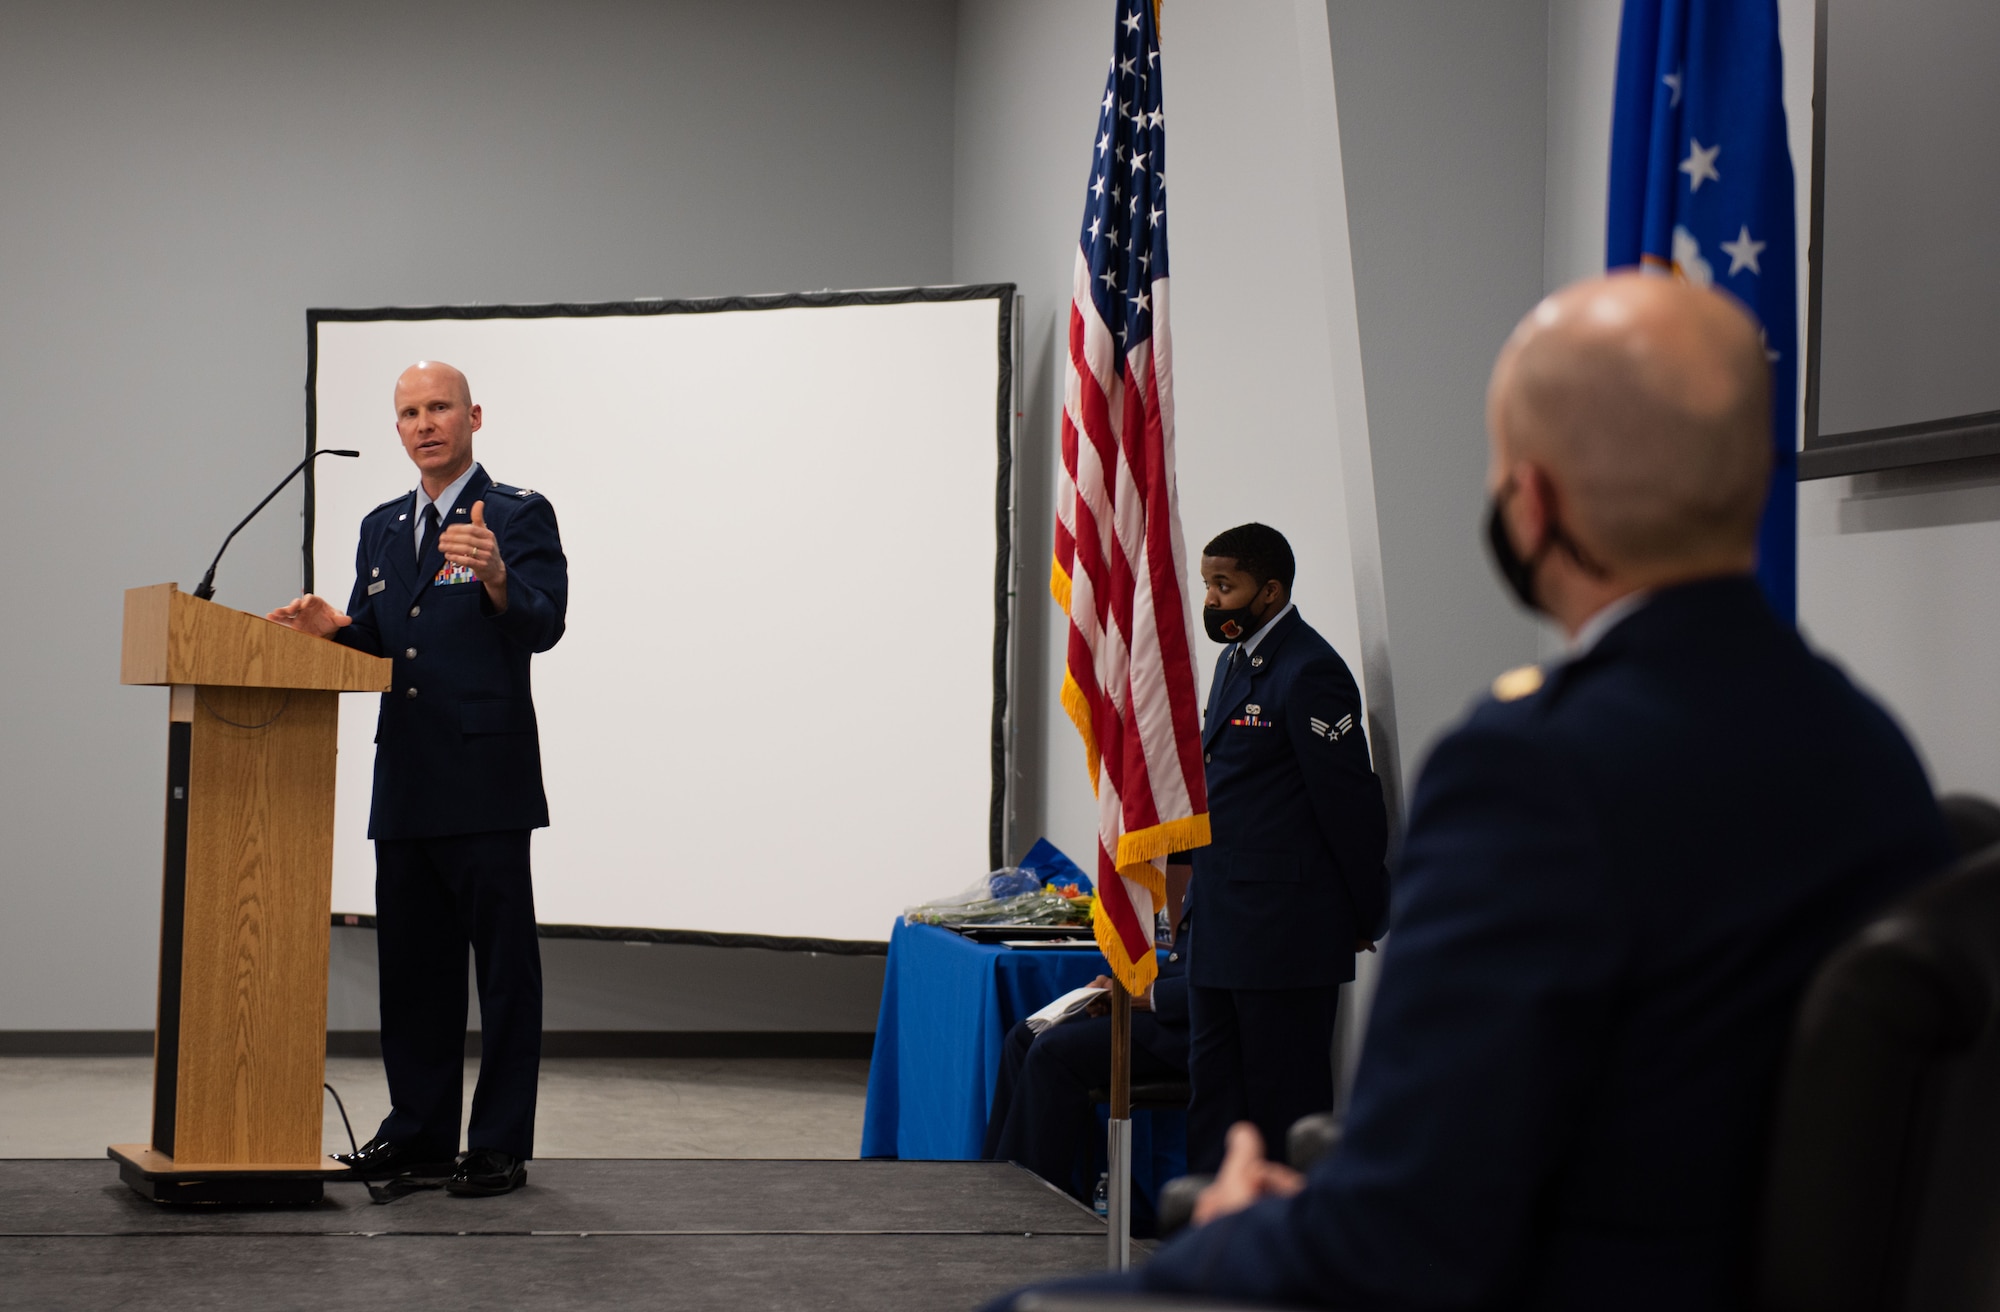 Col. Eric Schmidt speaks on the stage at Maj. Matthew Mendenhall's retirement ceremony.